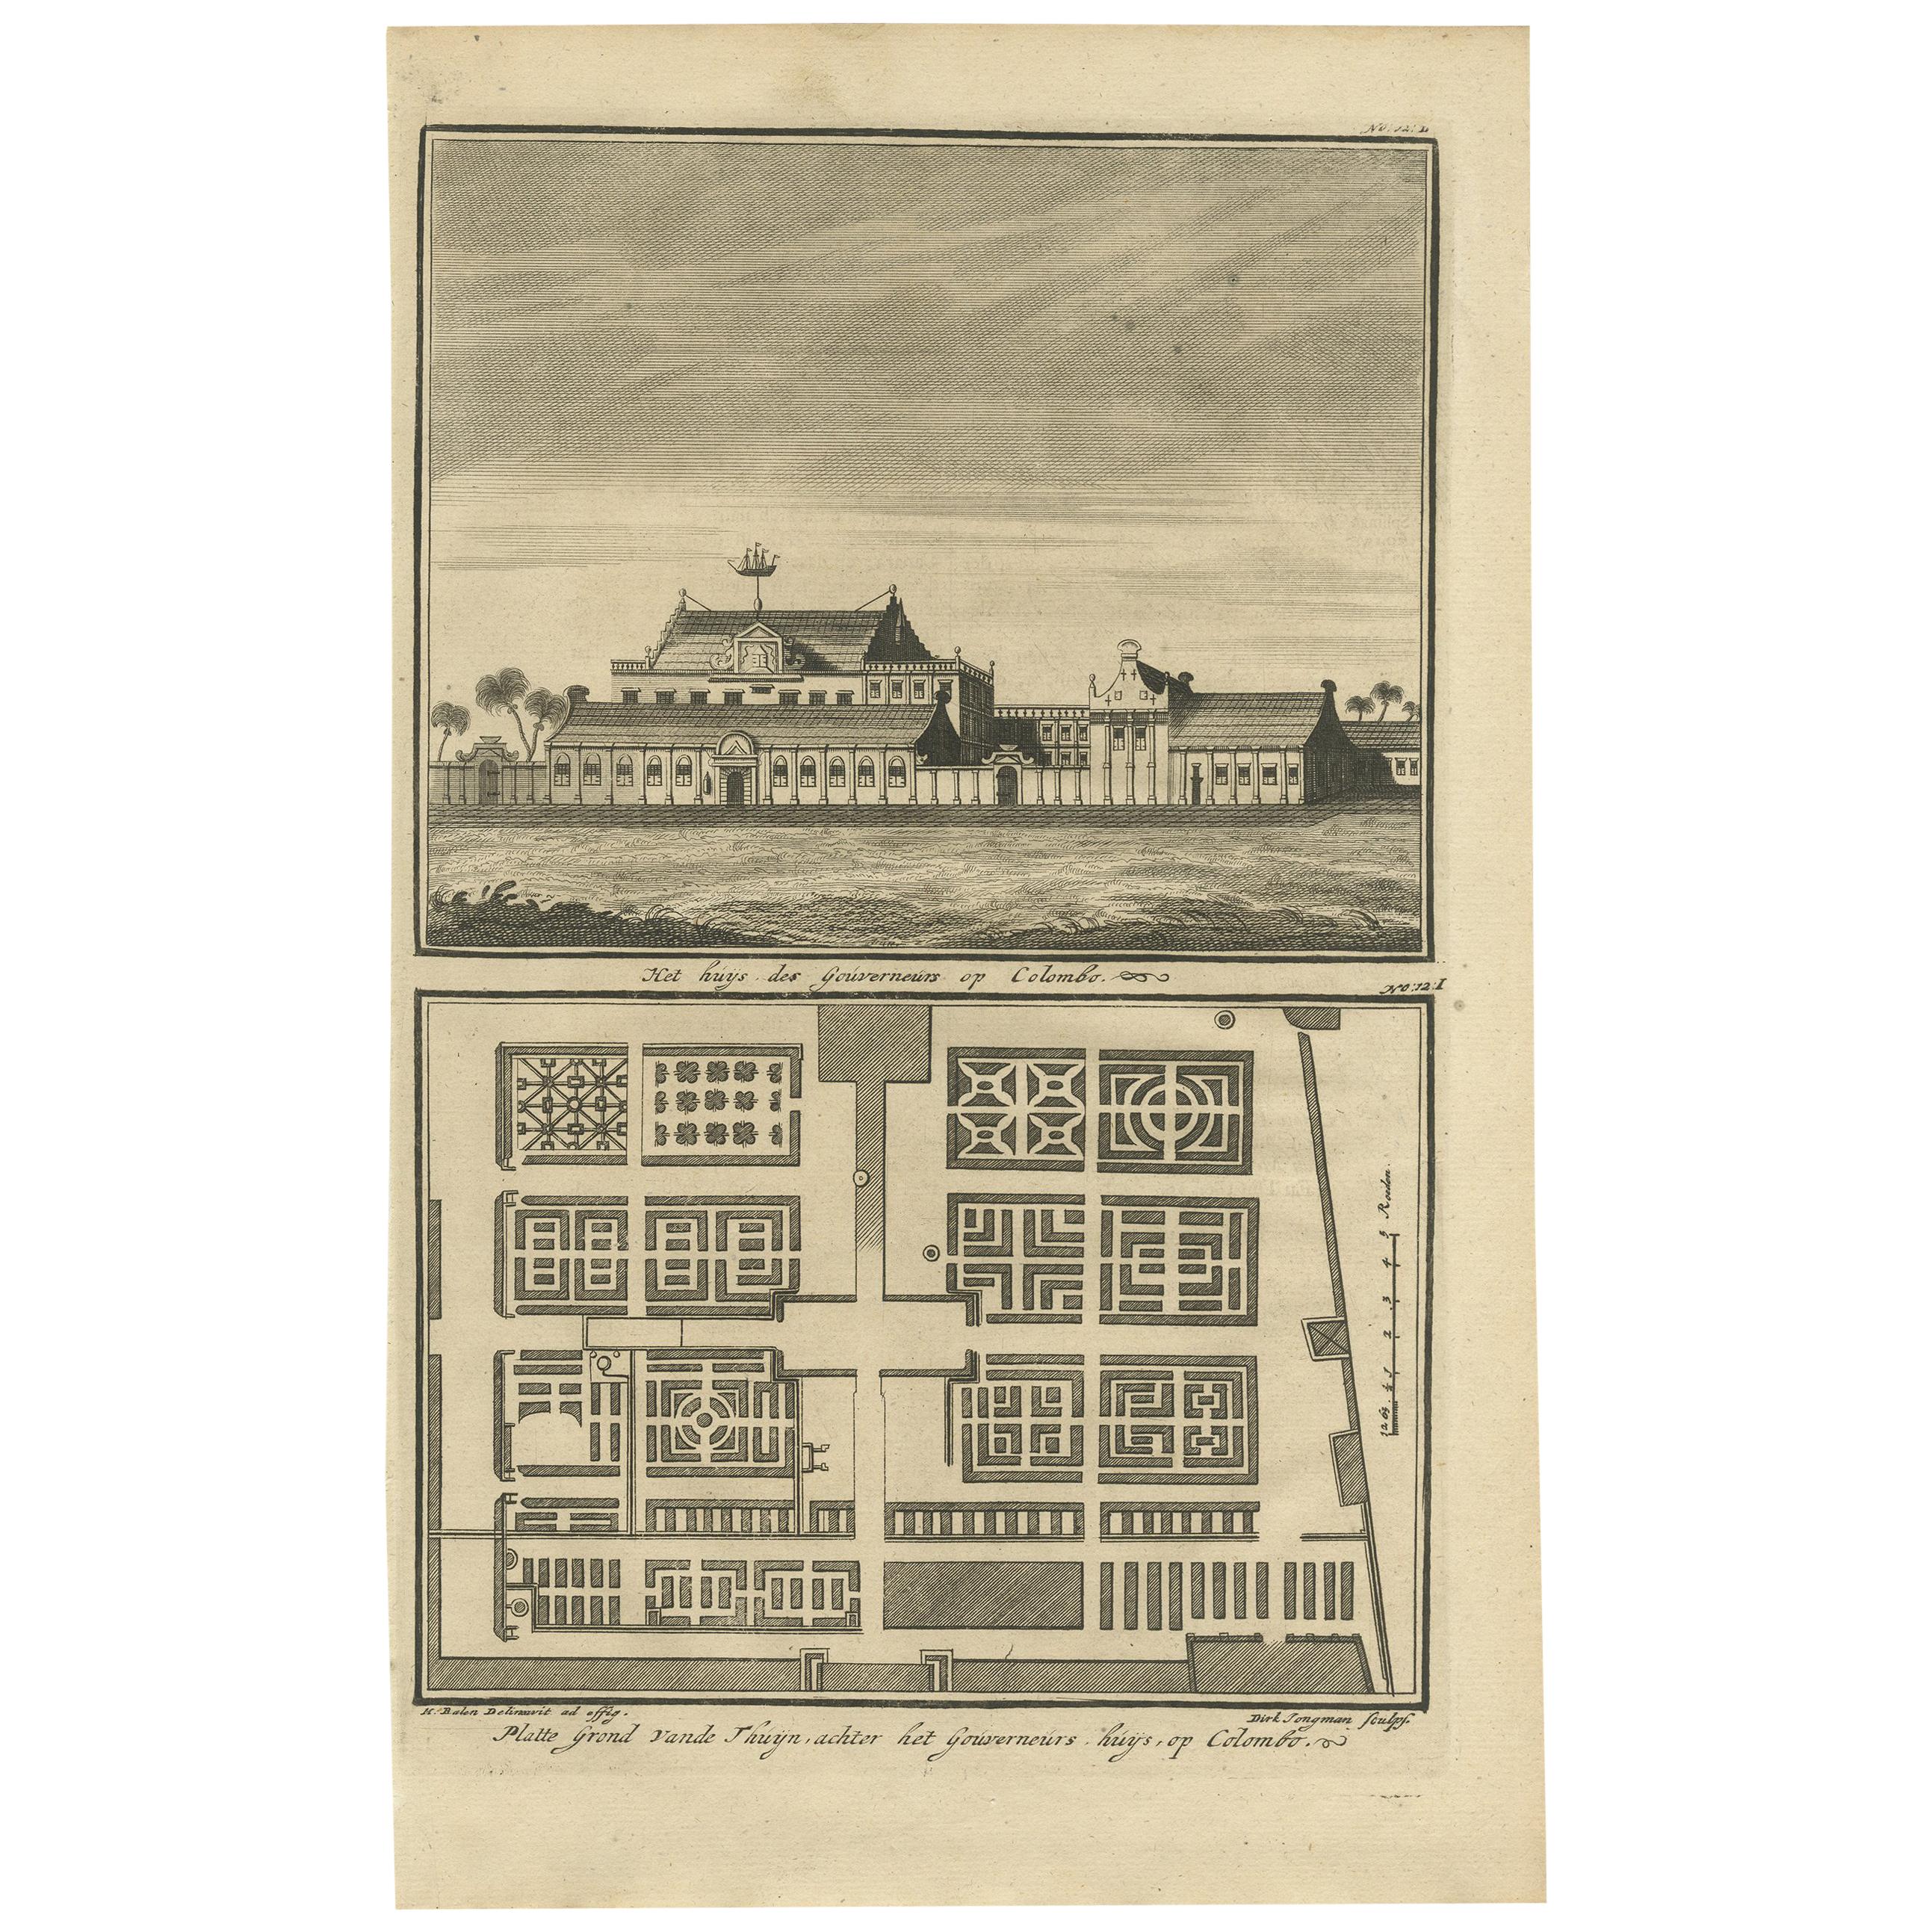 Antique Print of the Governor's House in Colombo by Valentijn, 1726